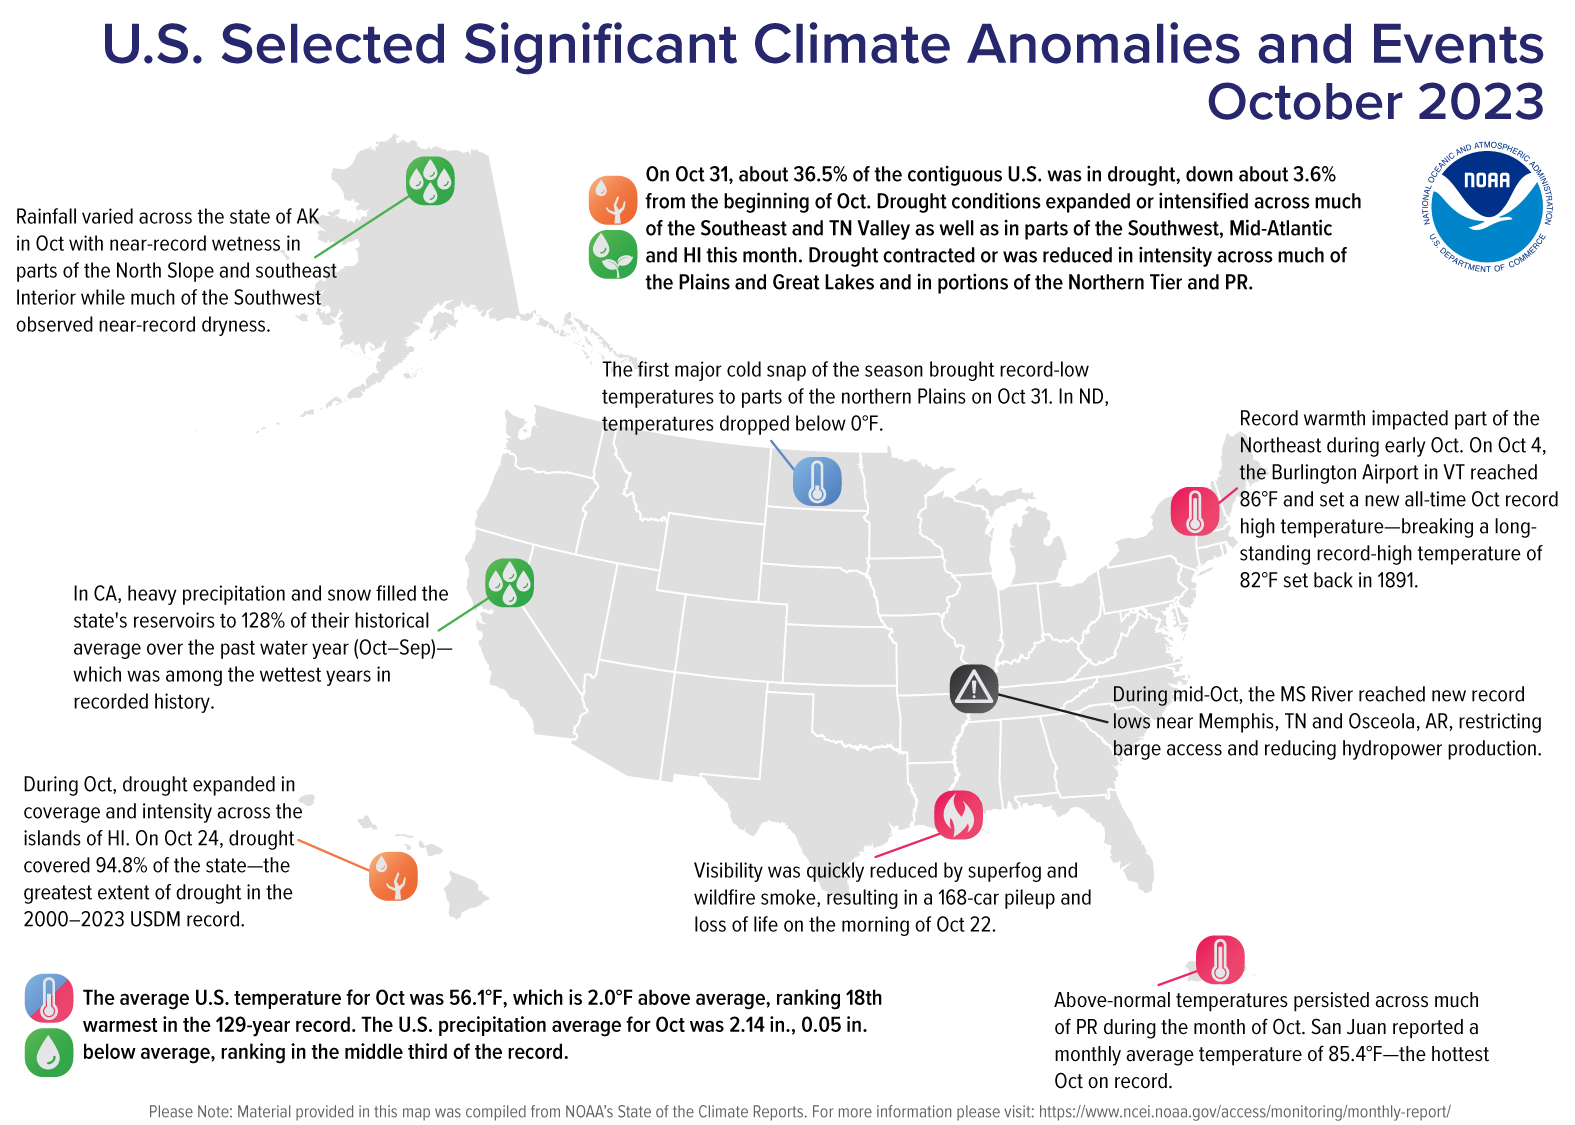 Map of U.S. selected significant climate anomalies and events for October 2023